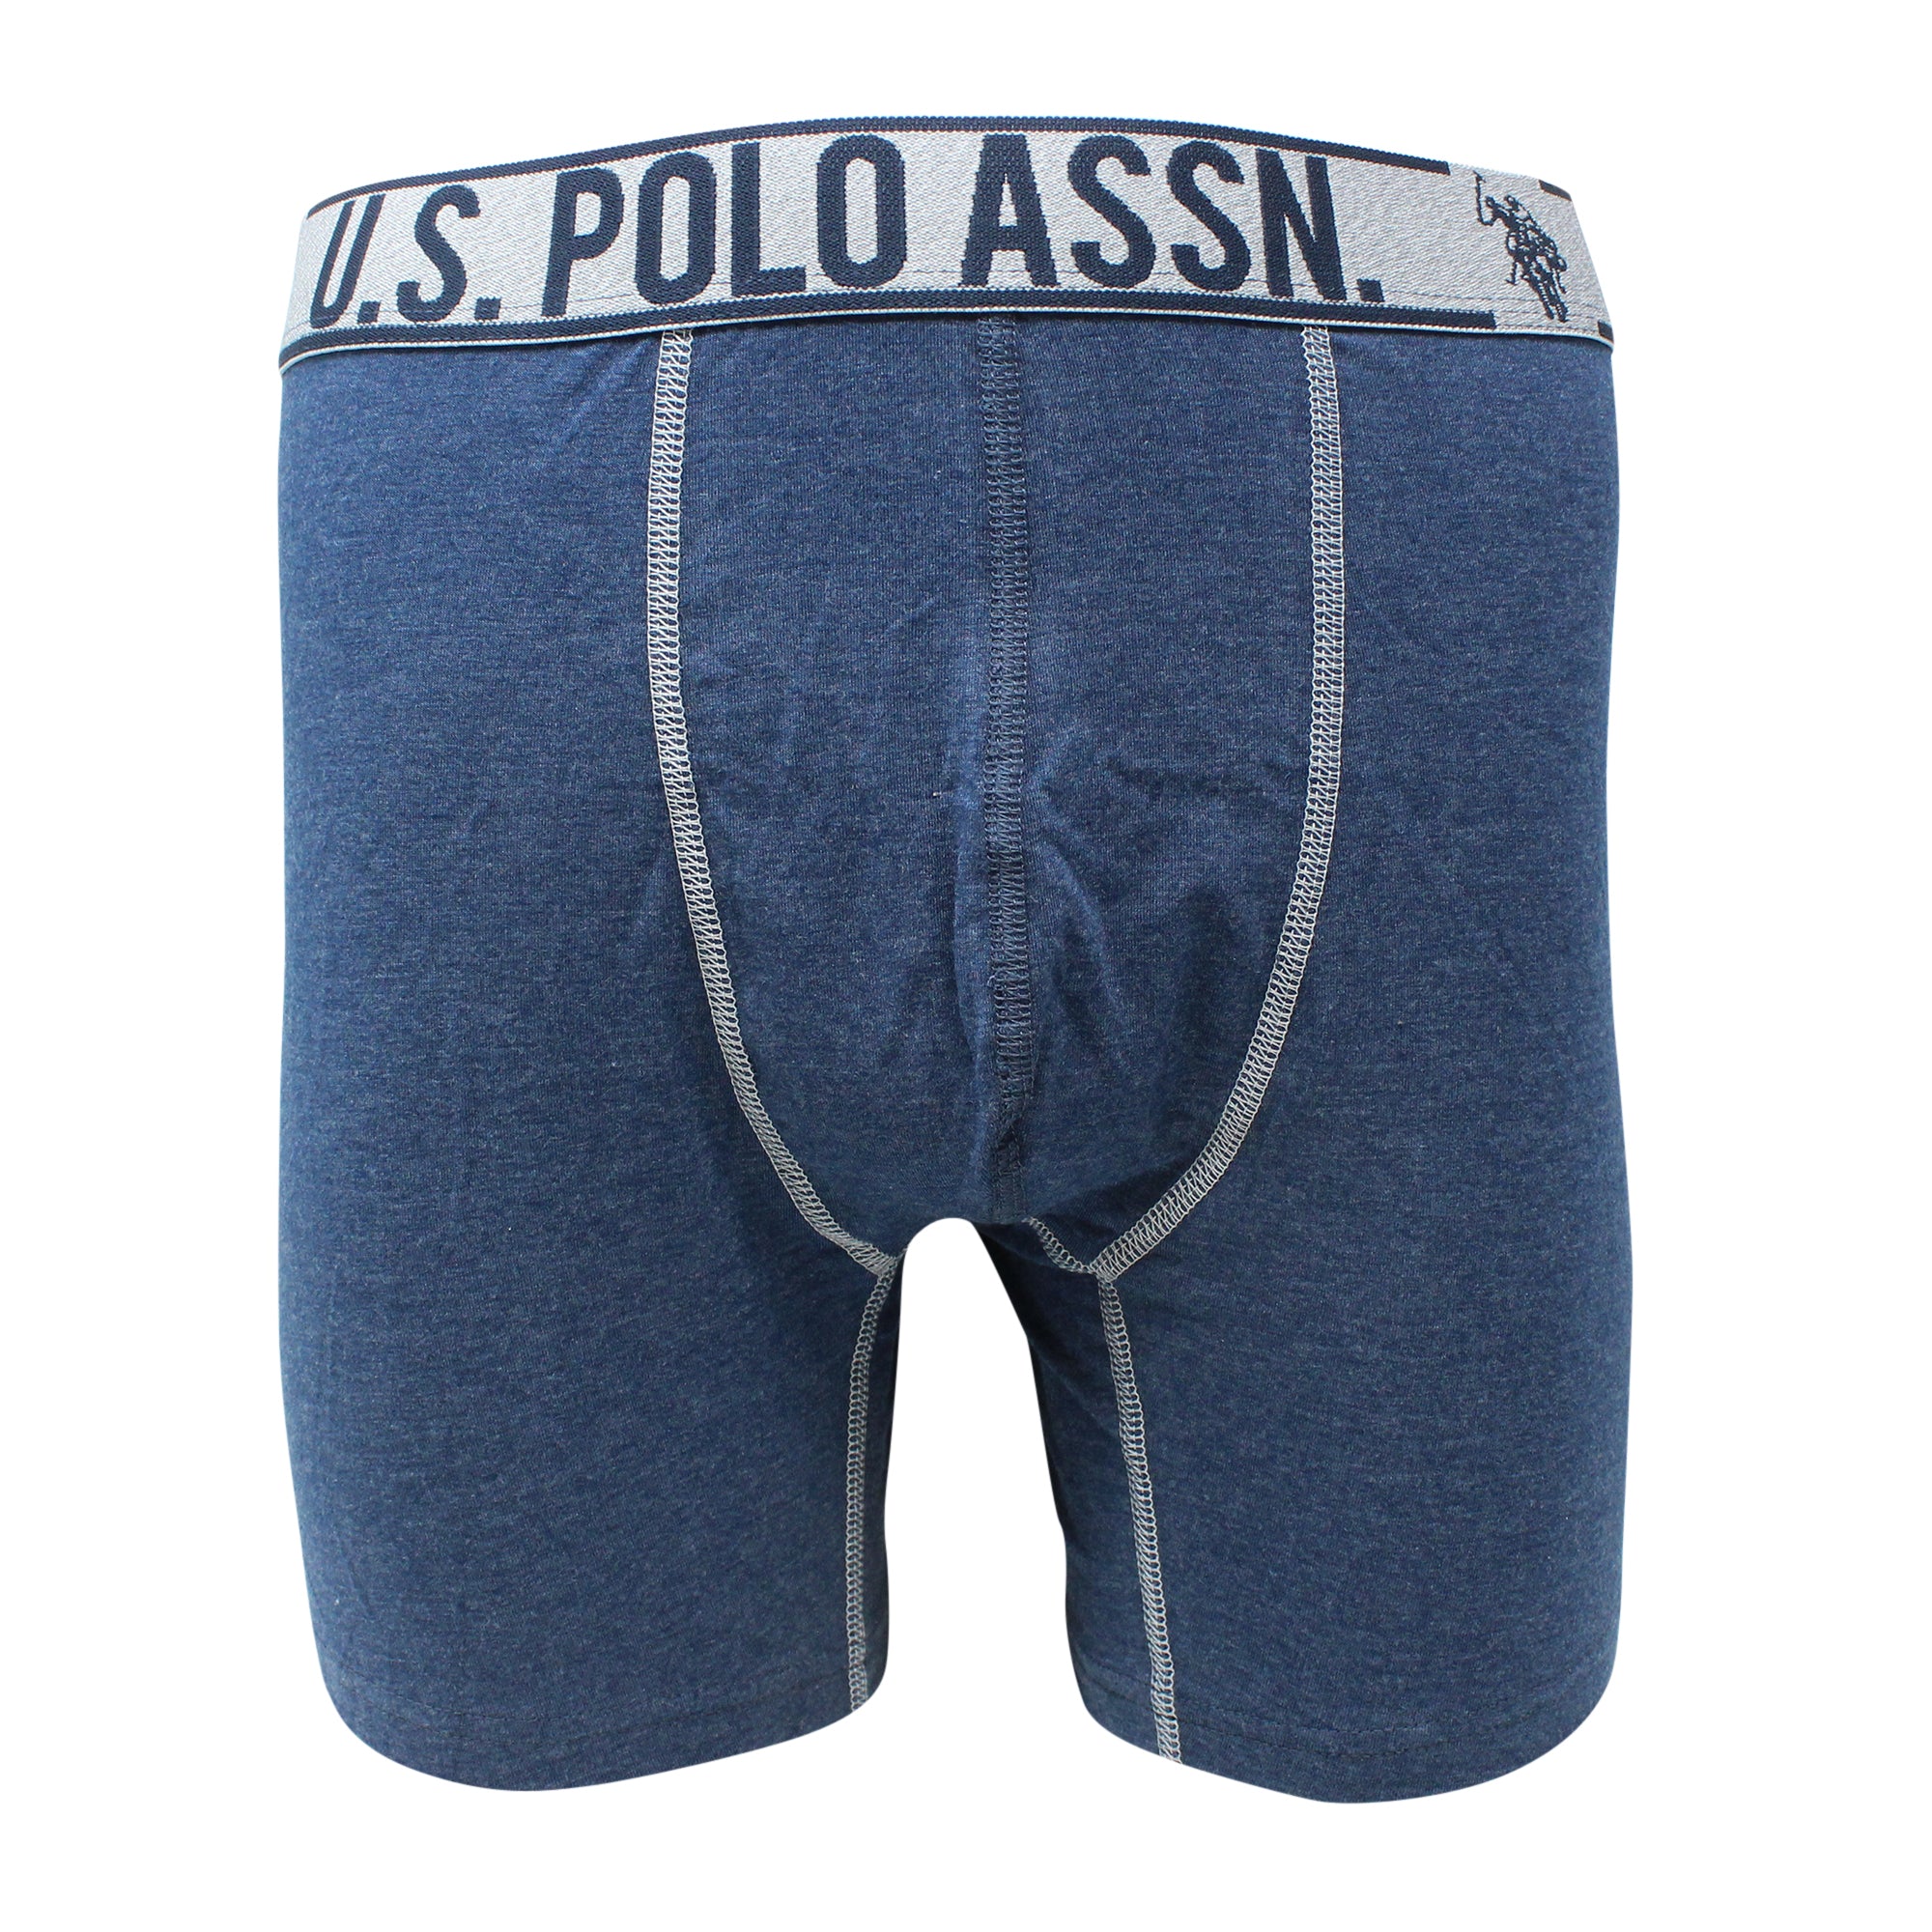 U.S. Polo Assn. Men's Cotton Brief (Pack of 4) (Colors May Vary